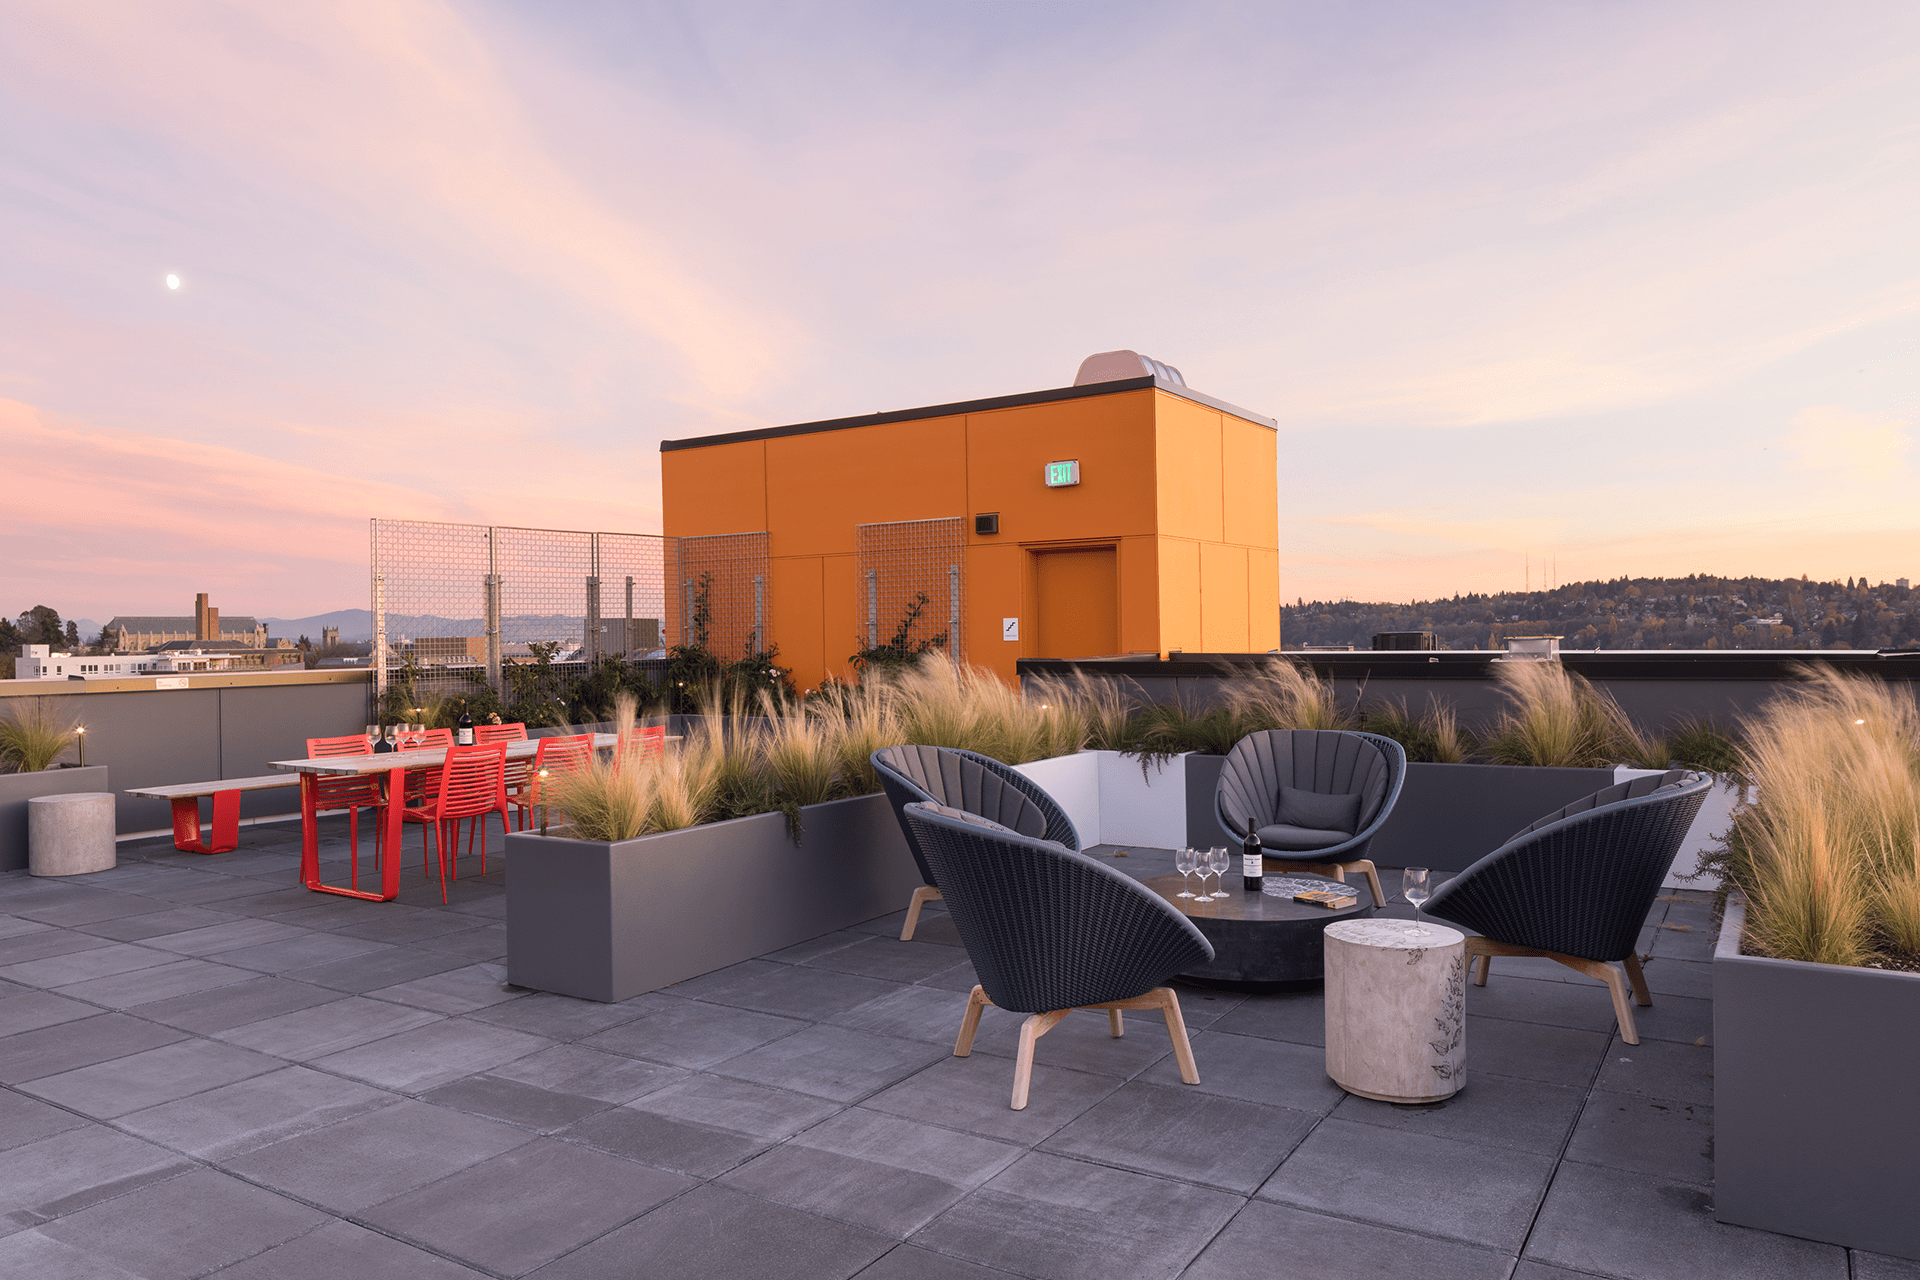 The top floor community space for the Roosevelt Apartments features multiple seating areas and a view of the city at dusk.